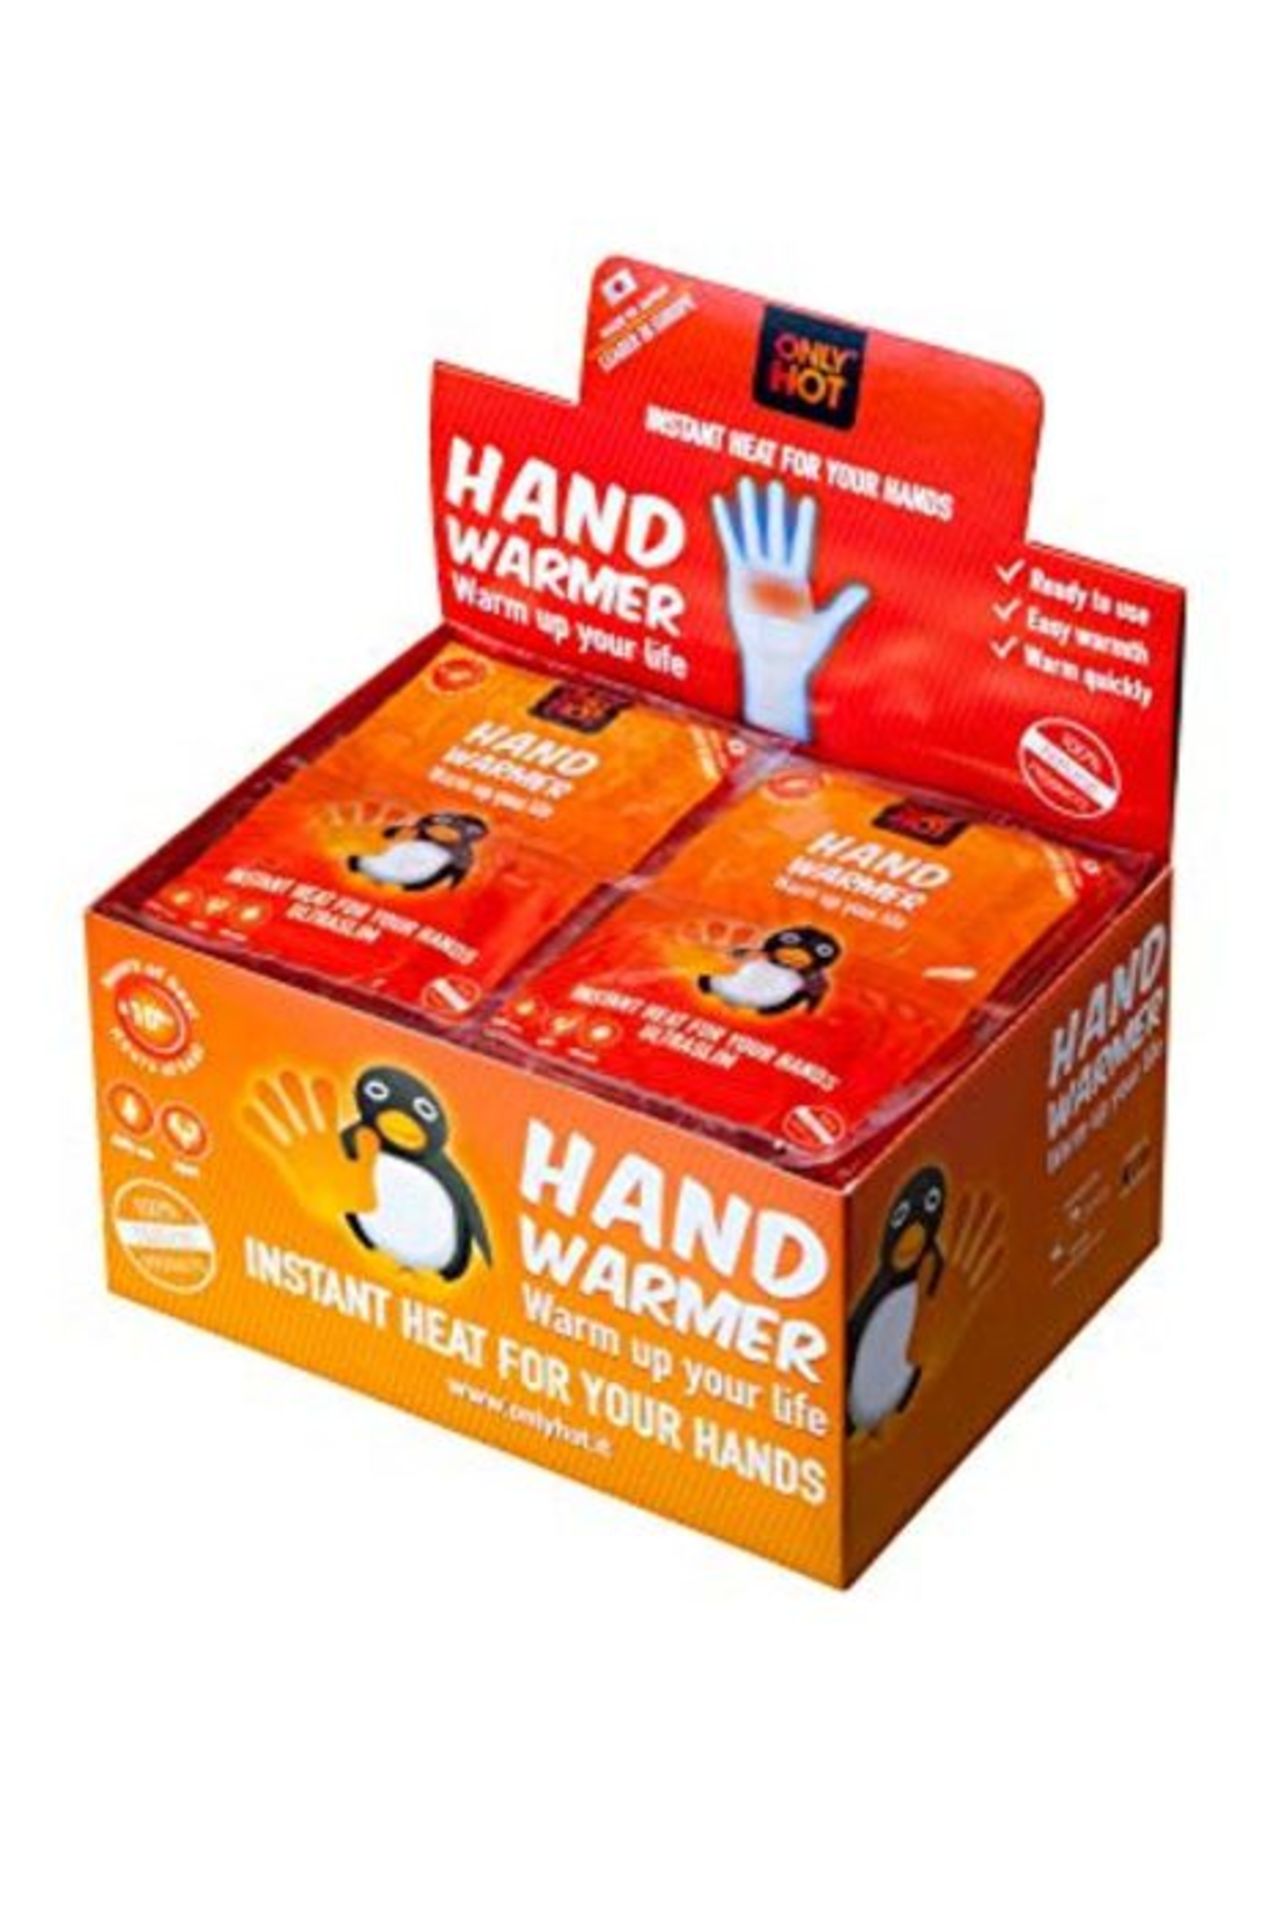 Hand Warmer Value Pack of 40 pairs(Pack of 2) by Only Hot